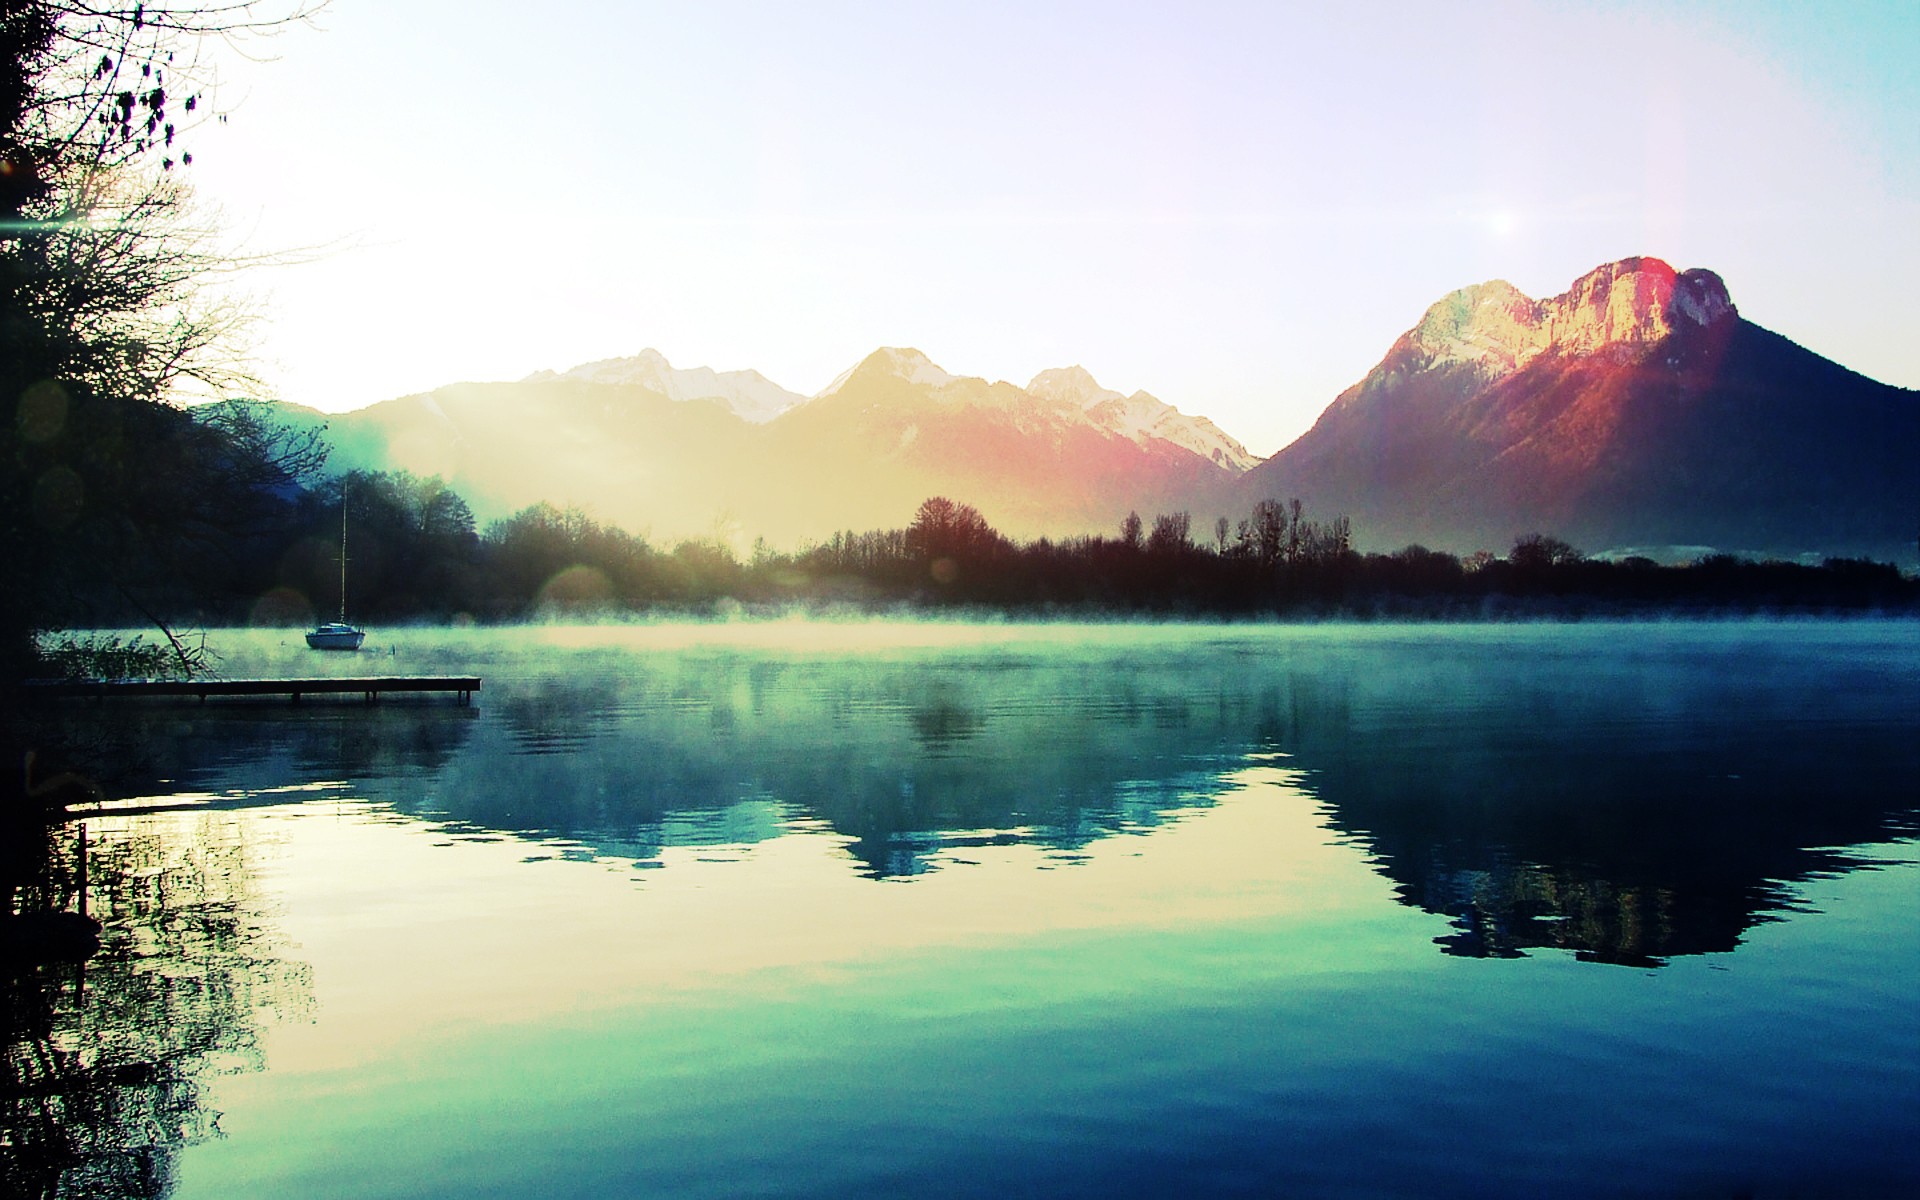 General 1920x1200 water lake mountains landscape nature calm pier boat sunlight mist sky reflection